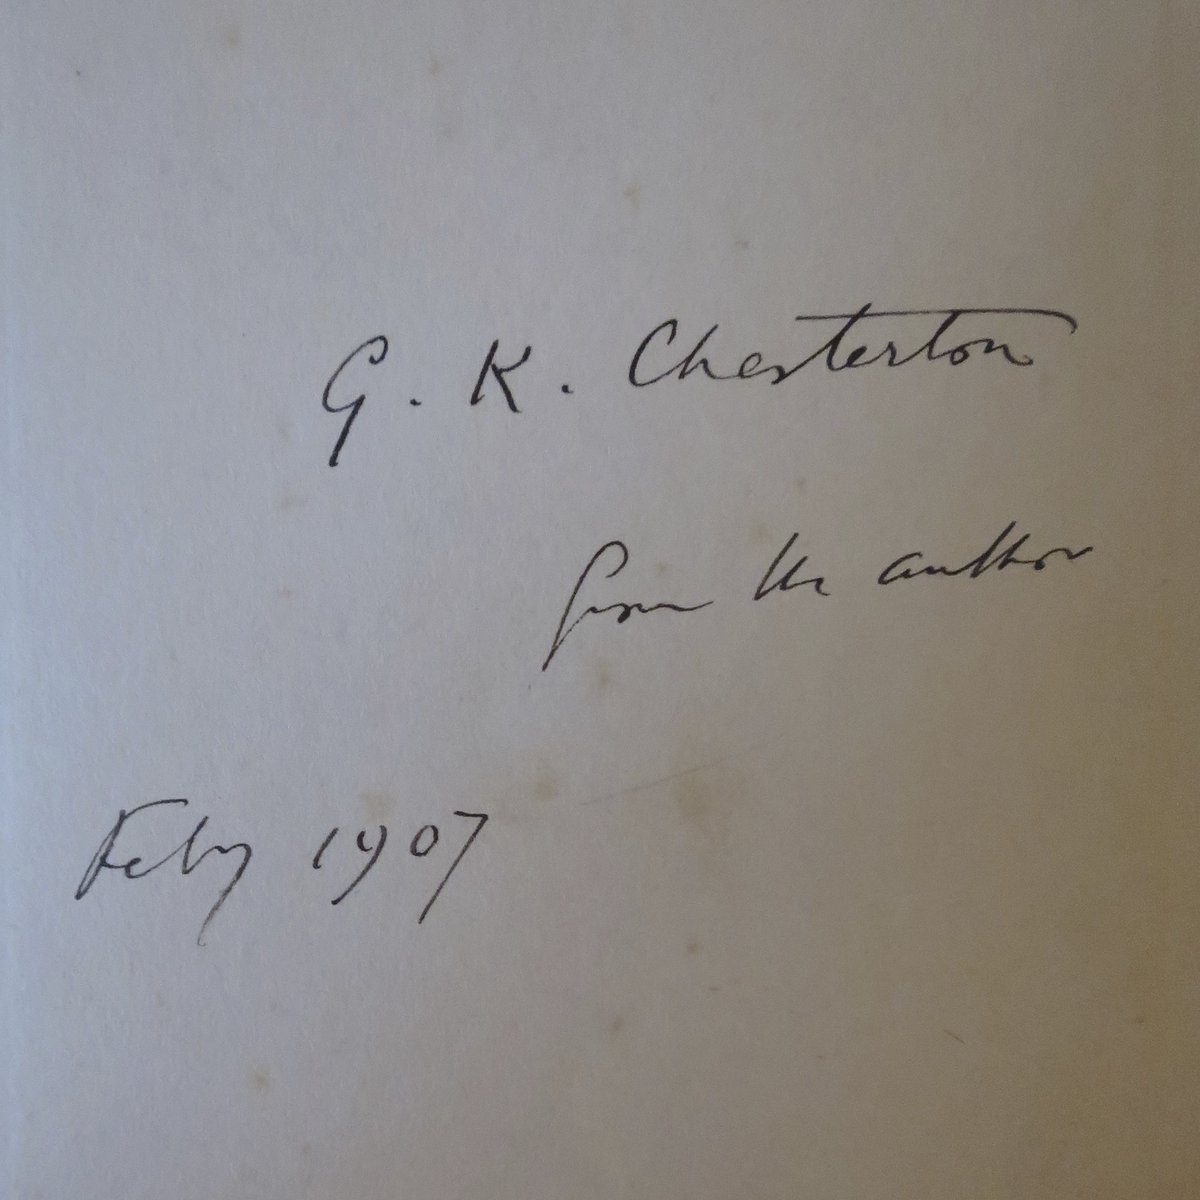 The best example of this is in Oliver Lodge’s The Substance of Faith Allied with Science: A Catechism for Parents and Teachers (1907), given to GKC by the author. The other two books with GK's marginalia are MacQuoid’s Jacobite Songs and Ballads and Allingham’s The Ballad Book.